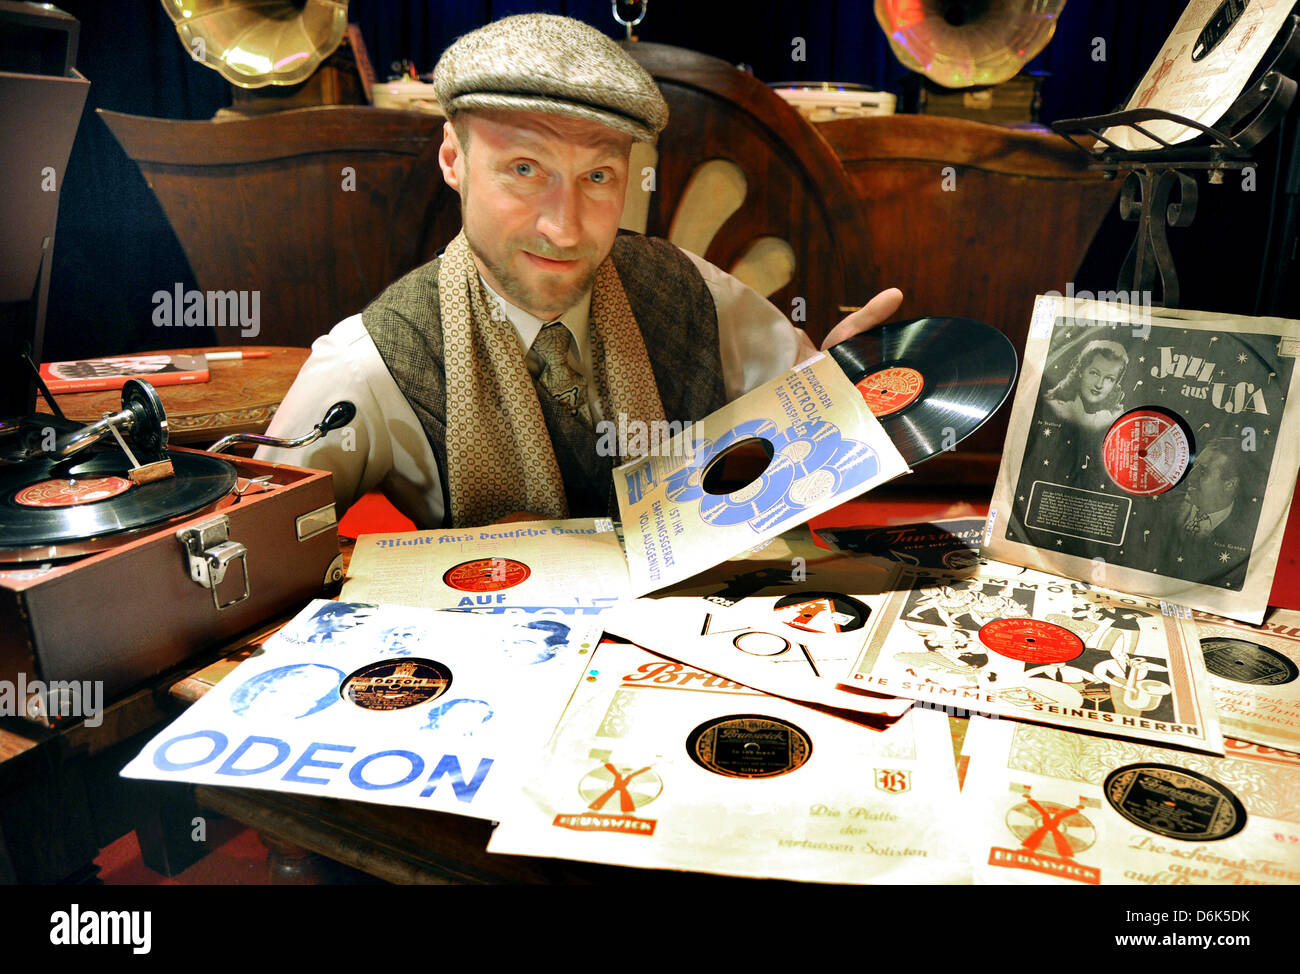 Berlin-based discjockey and gramophone records collector Stephan Wuthe poses with some of his records and a gramophone in Leipzig, Germany, 17 March 2012. Swing music and records have experienced a renaissance and become en vogue again. Photo: Waltraud Grubitzsch Stock Photo